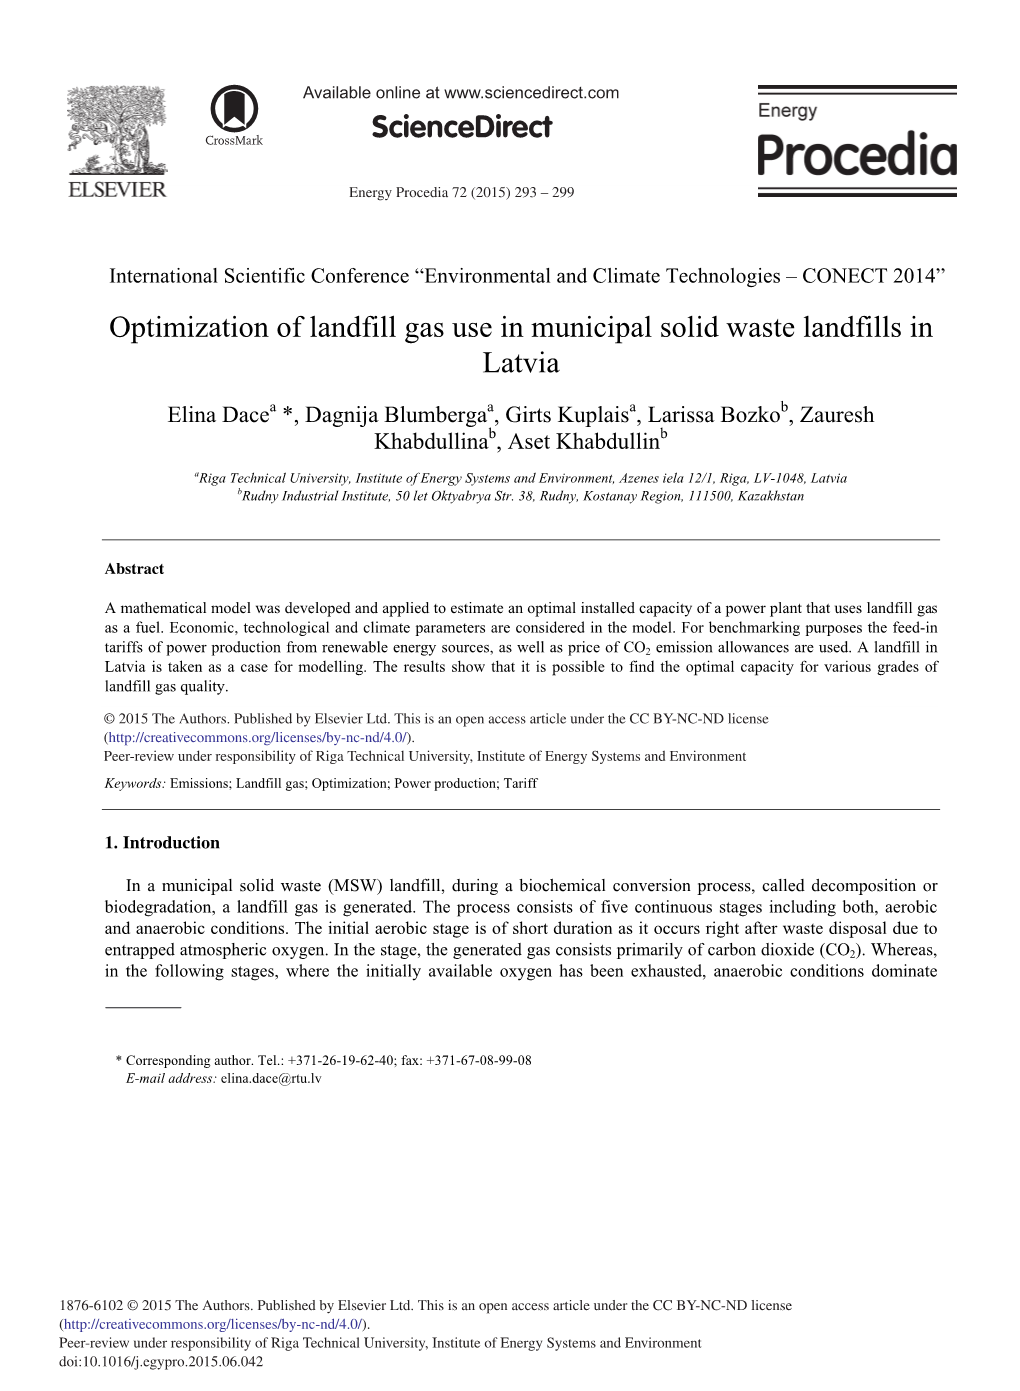 Optimization of Landfill Gas Use in Municipal Solid Waste Landfills in Latvia